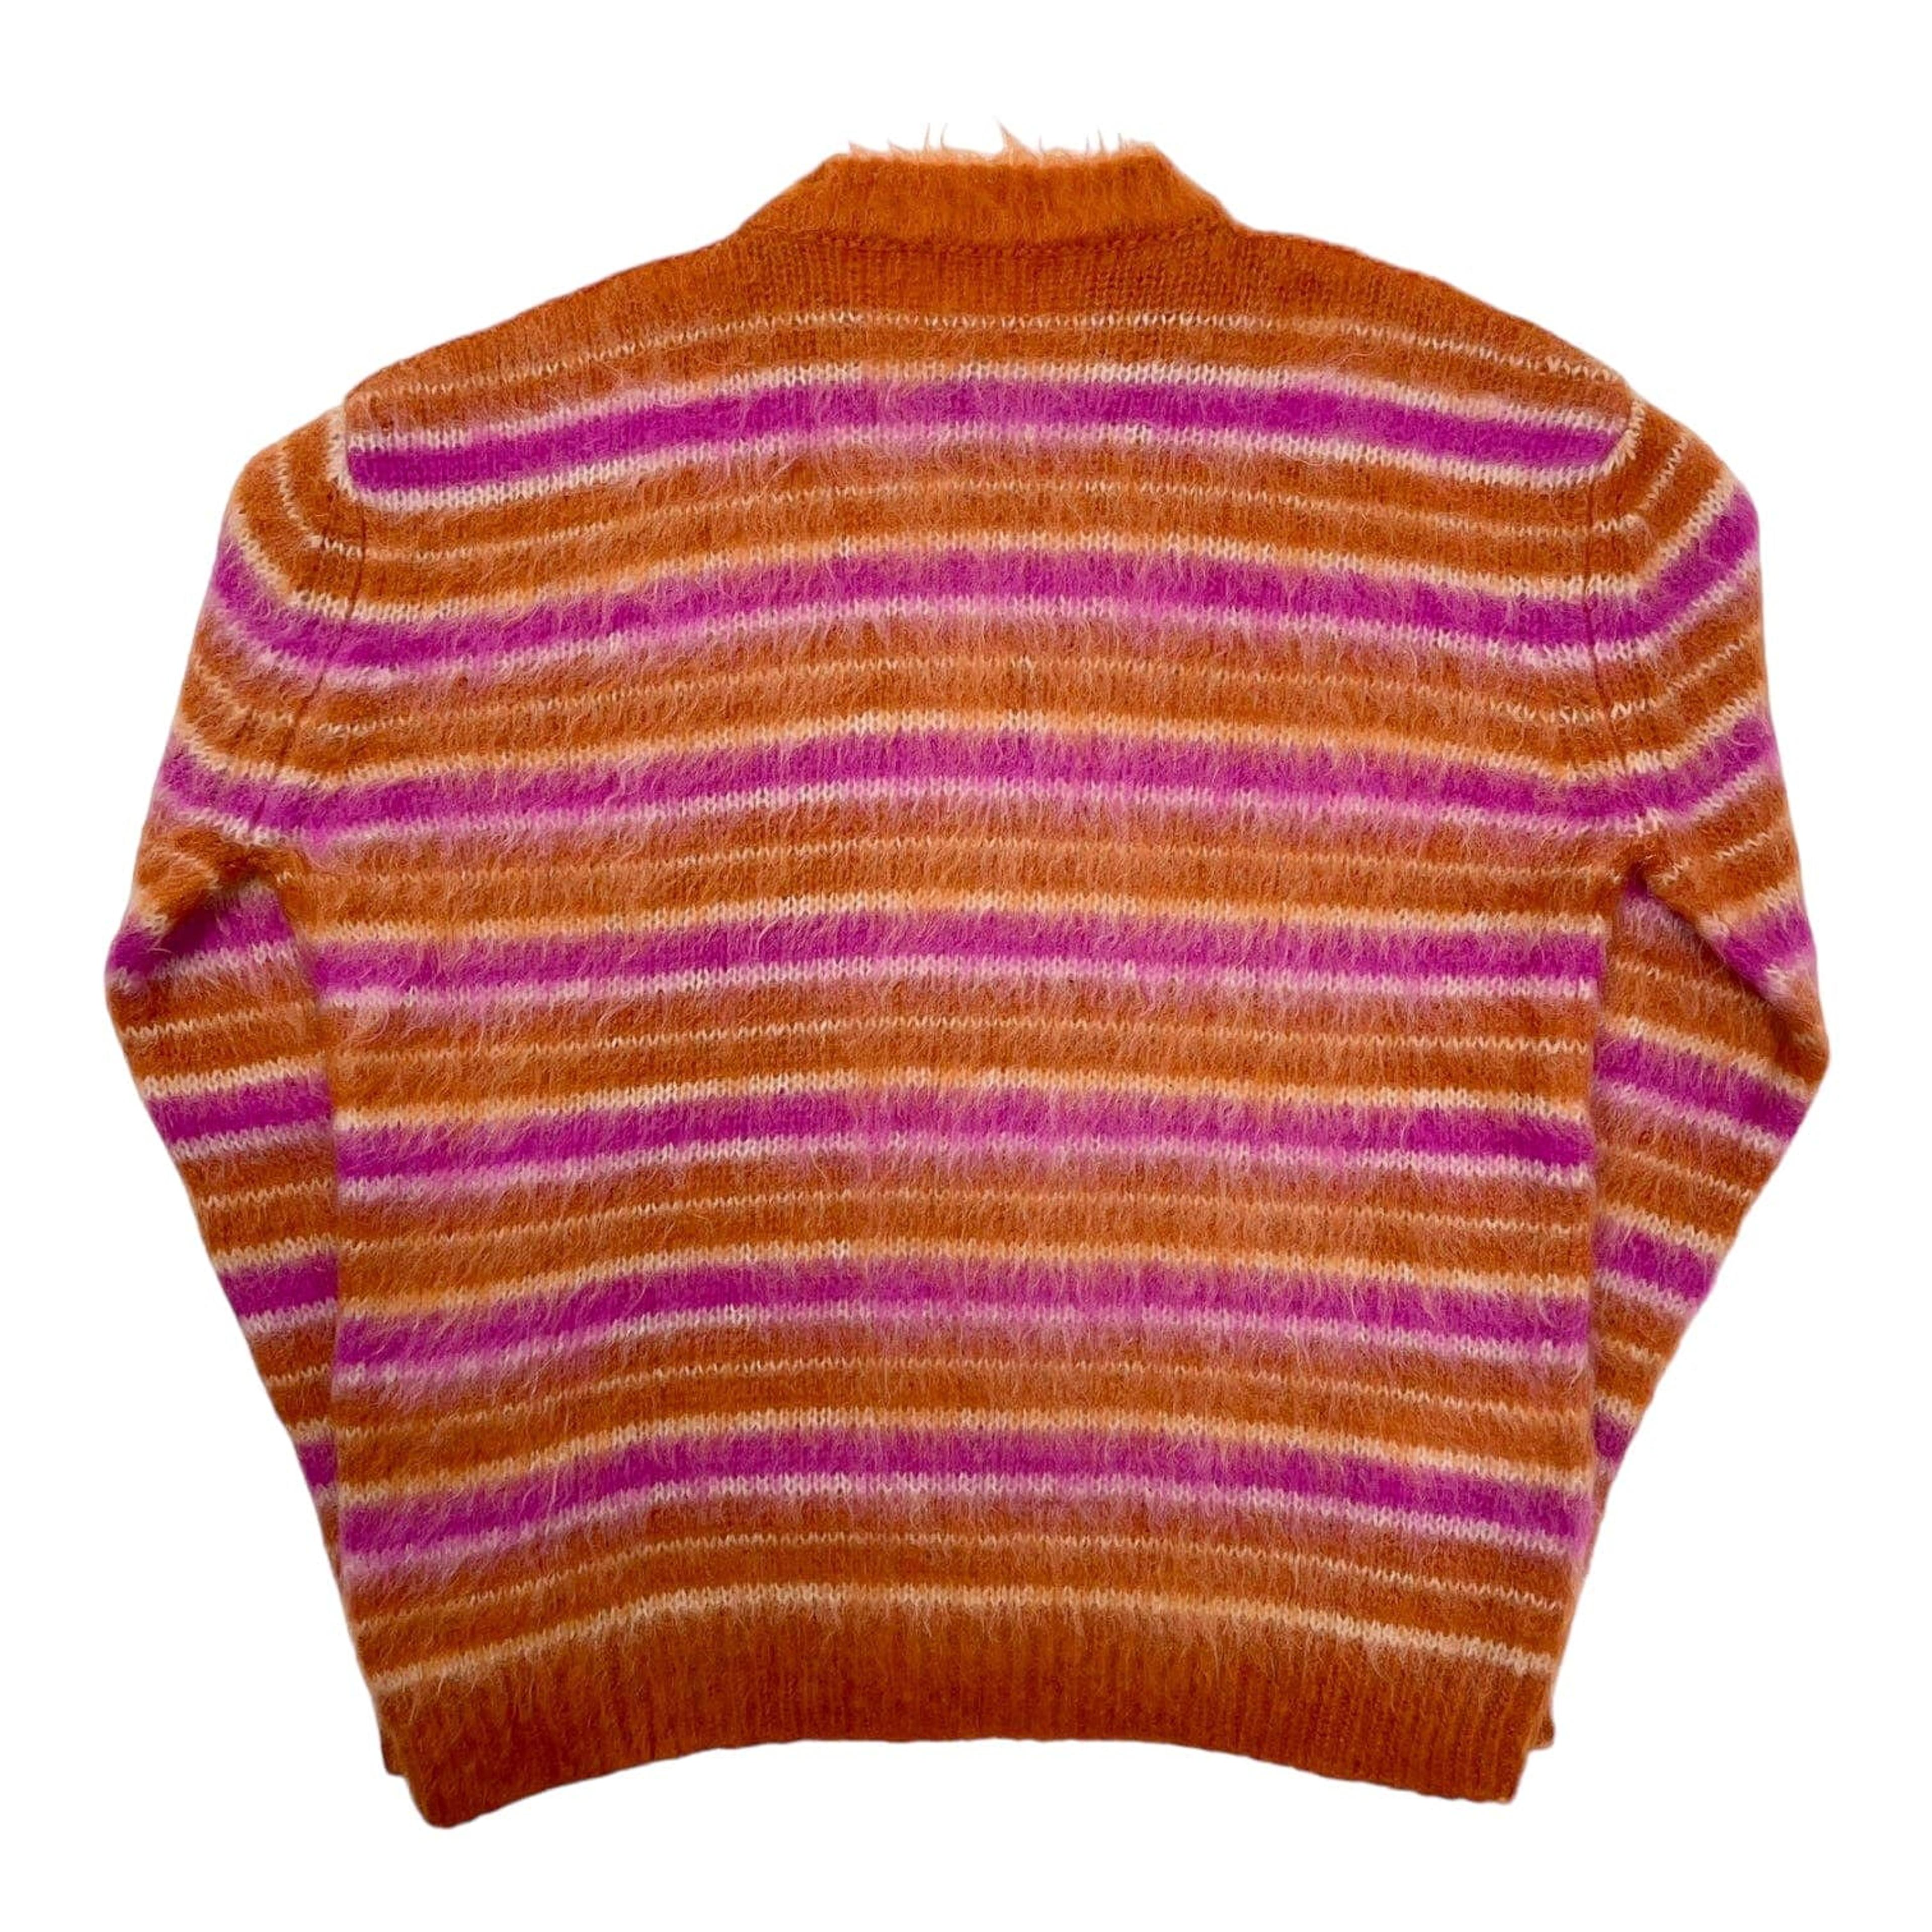 Alternate View 1 of Marni Striped Mohair Knit Sweater Orange Pink Pre-Owned